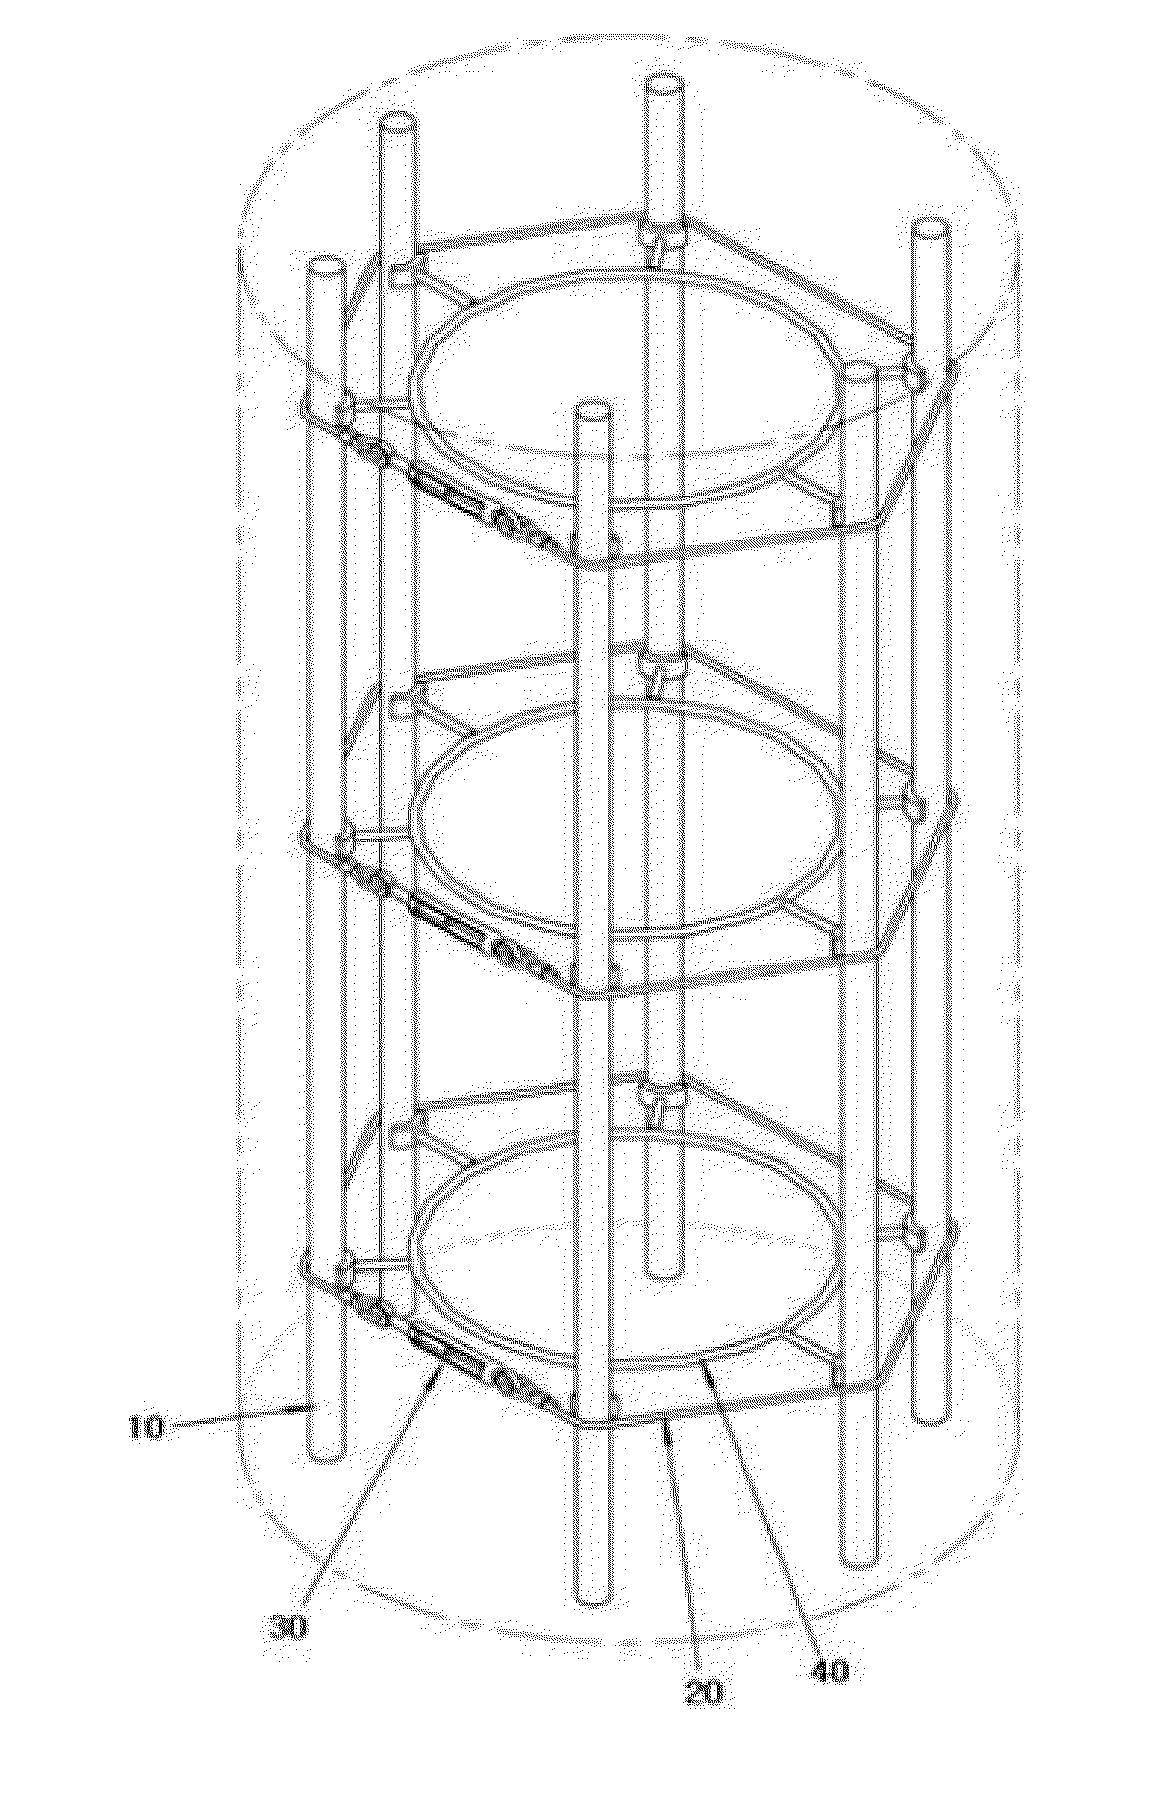 Fire-resistance enhancing method for the high strength concrete structure